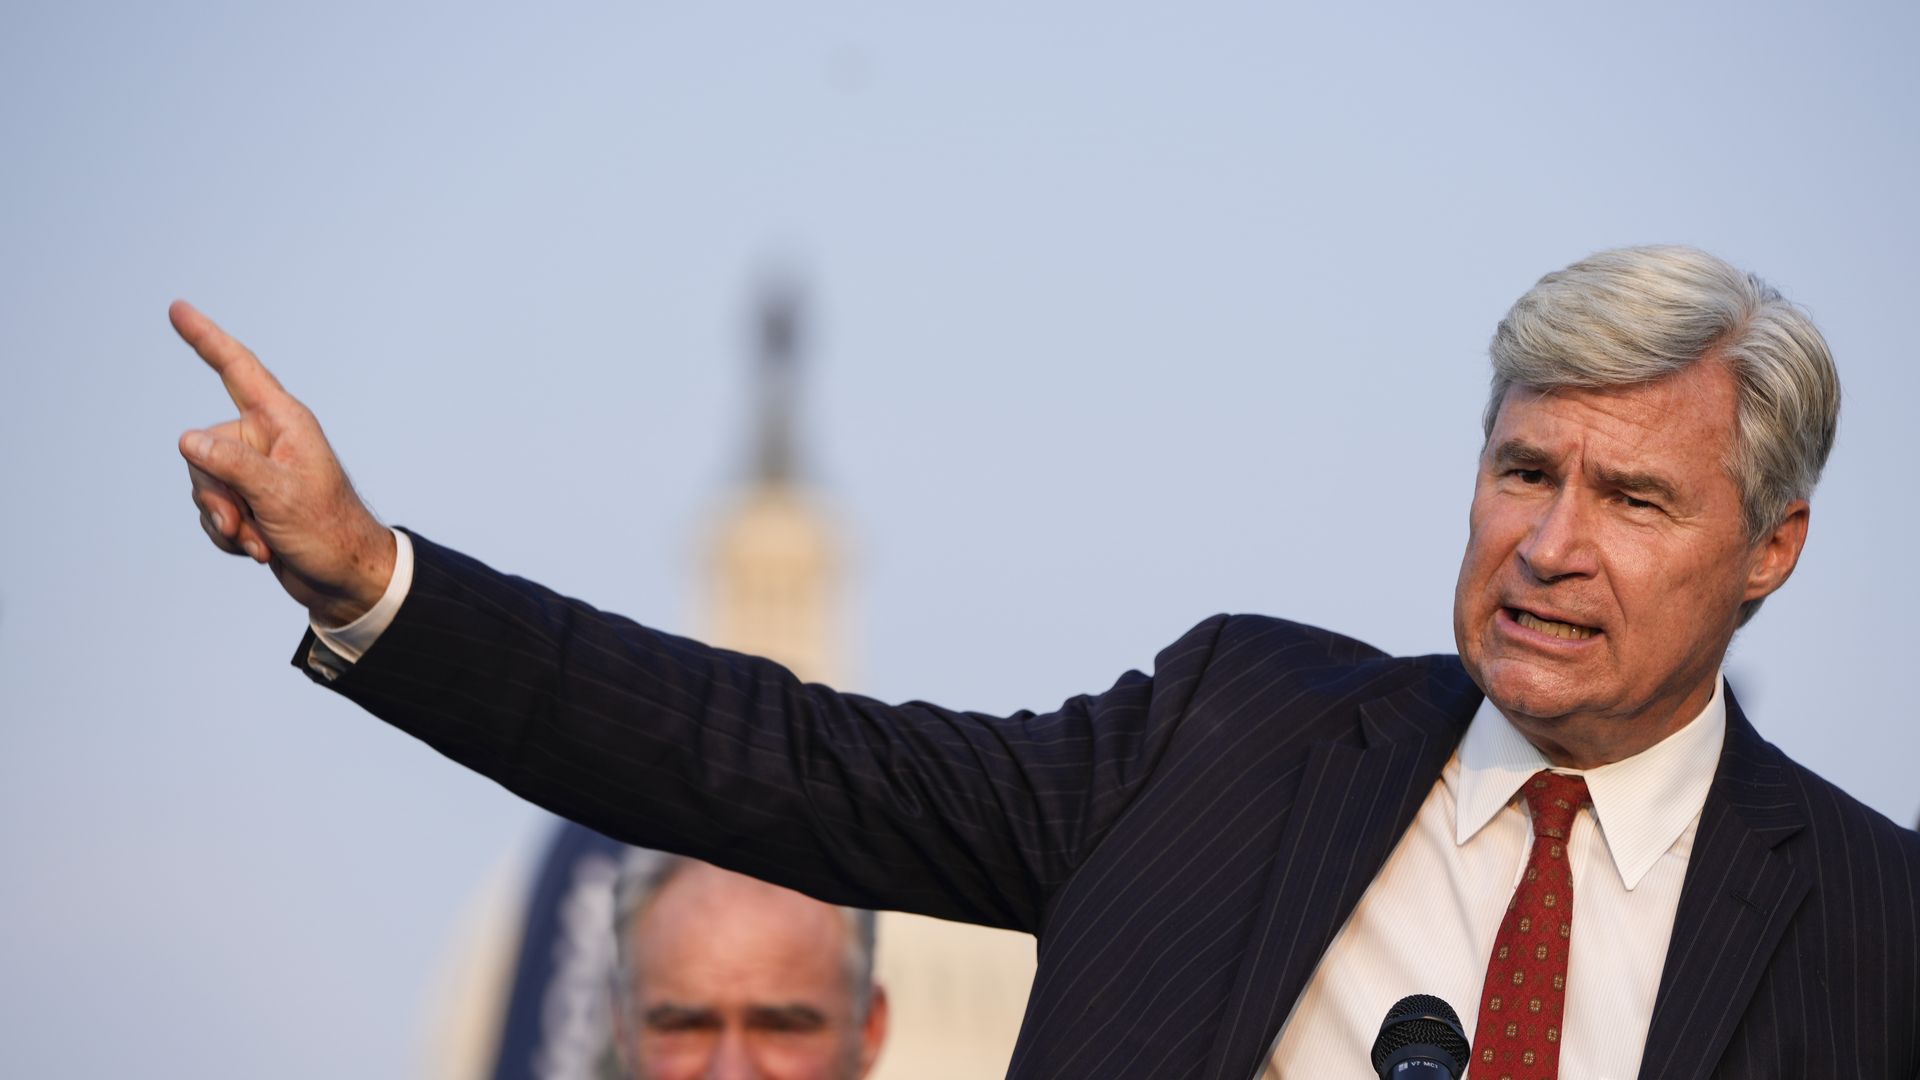 U.S. Sen. Sheldon Whitehouse (D-RI) with his arm extended speaks during a rally near the U.S. Capitol.